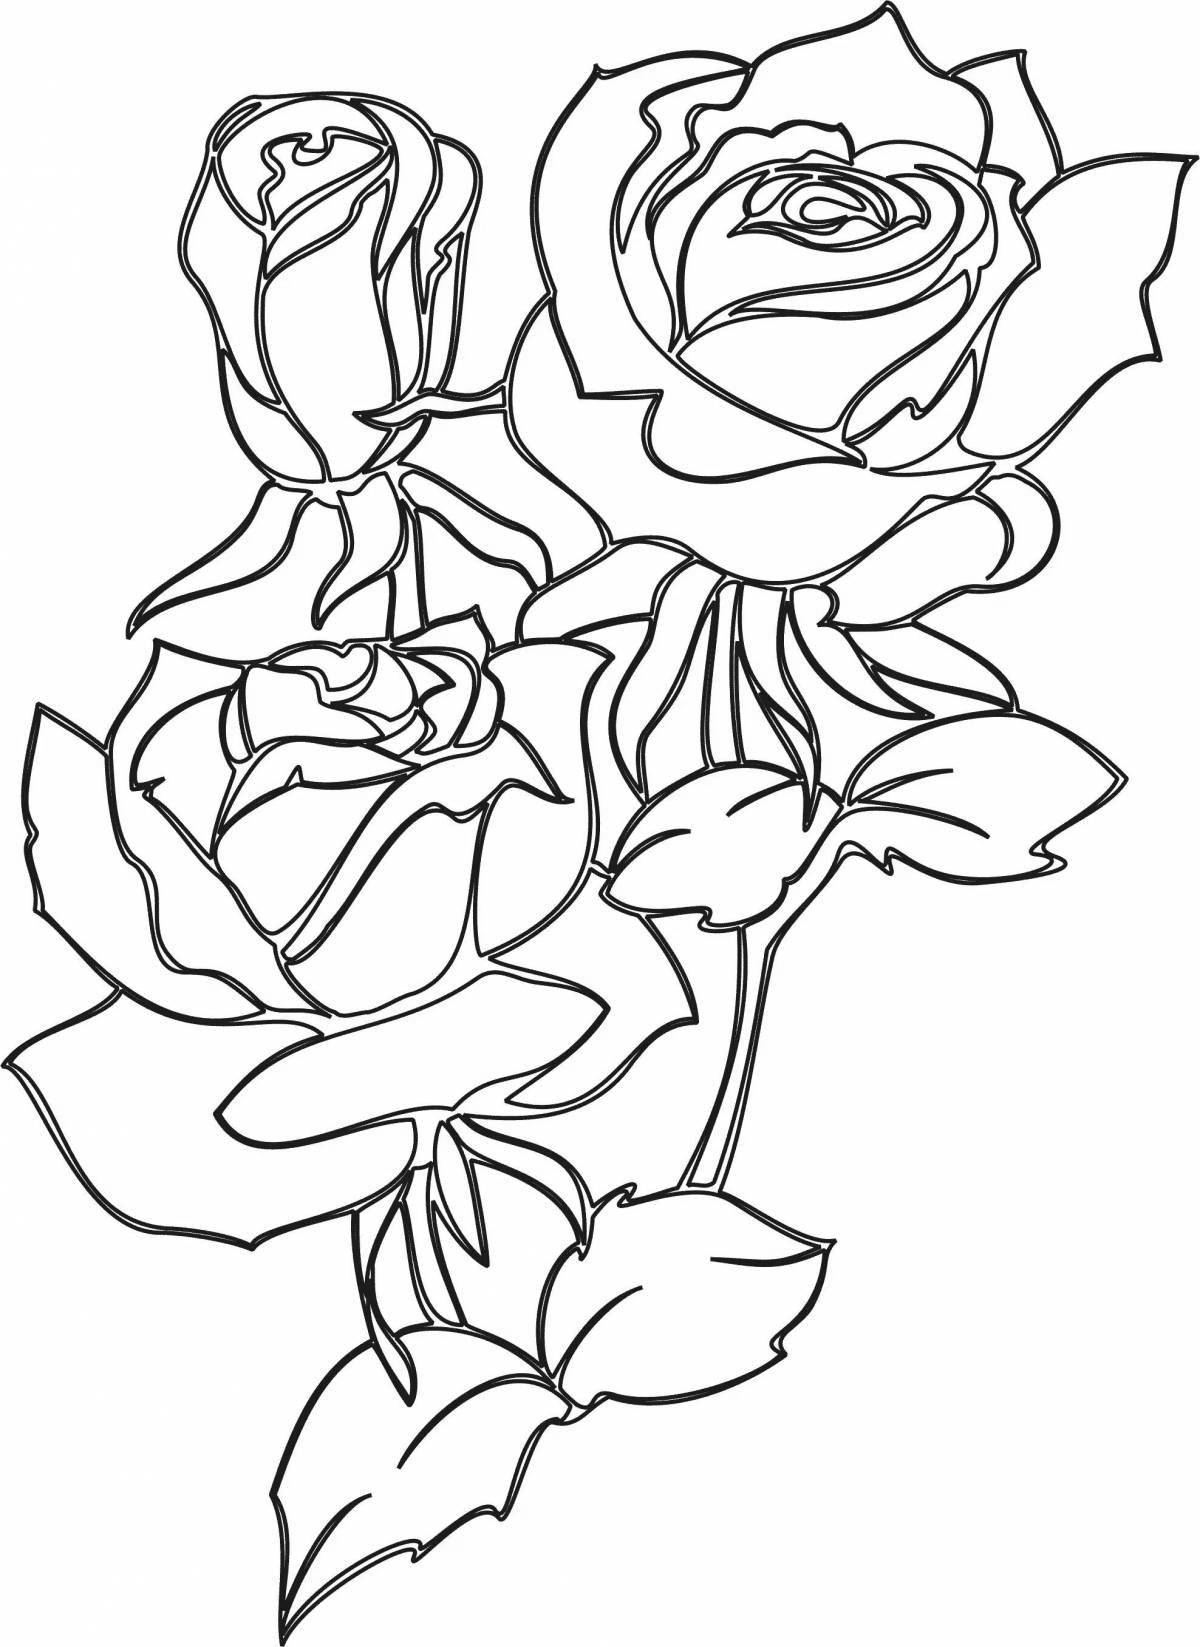 Happy birthday rose coloring page